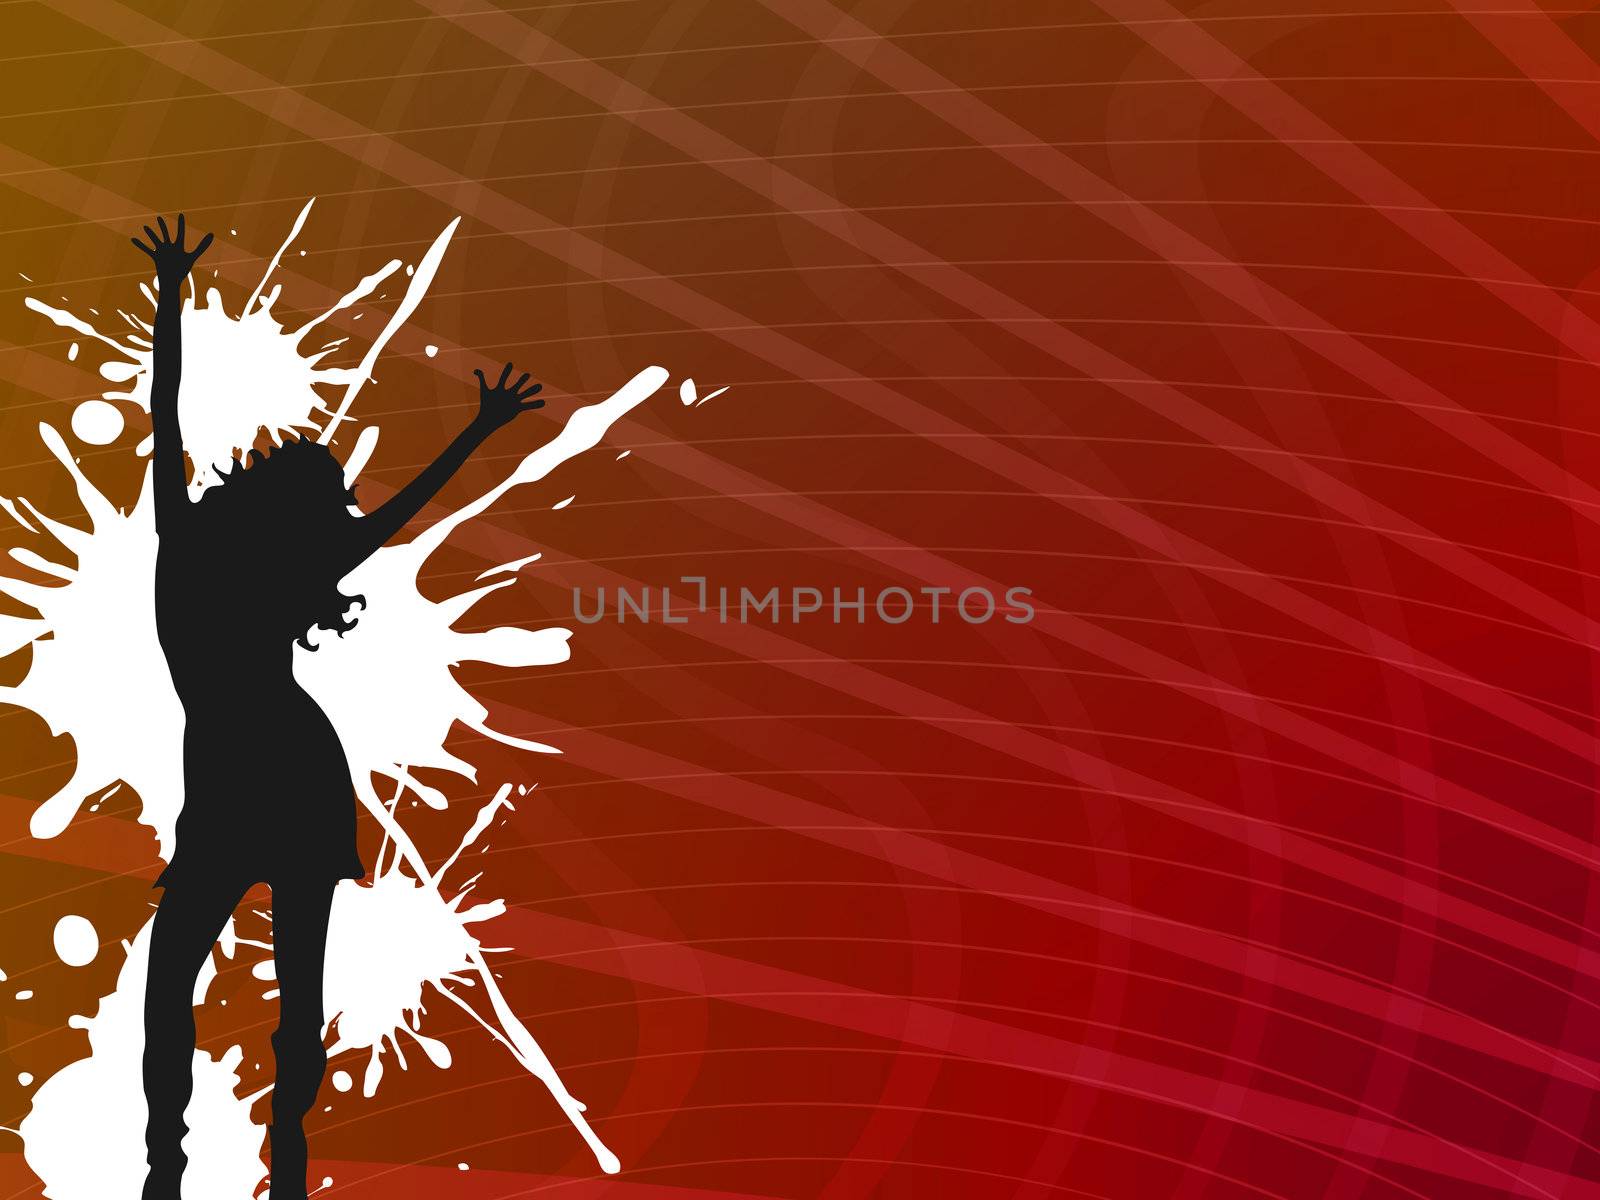 stripy abstract background with girl silhouette and white splats, vector art illustration; image contains transparency